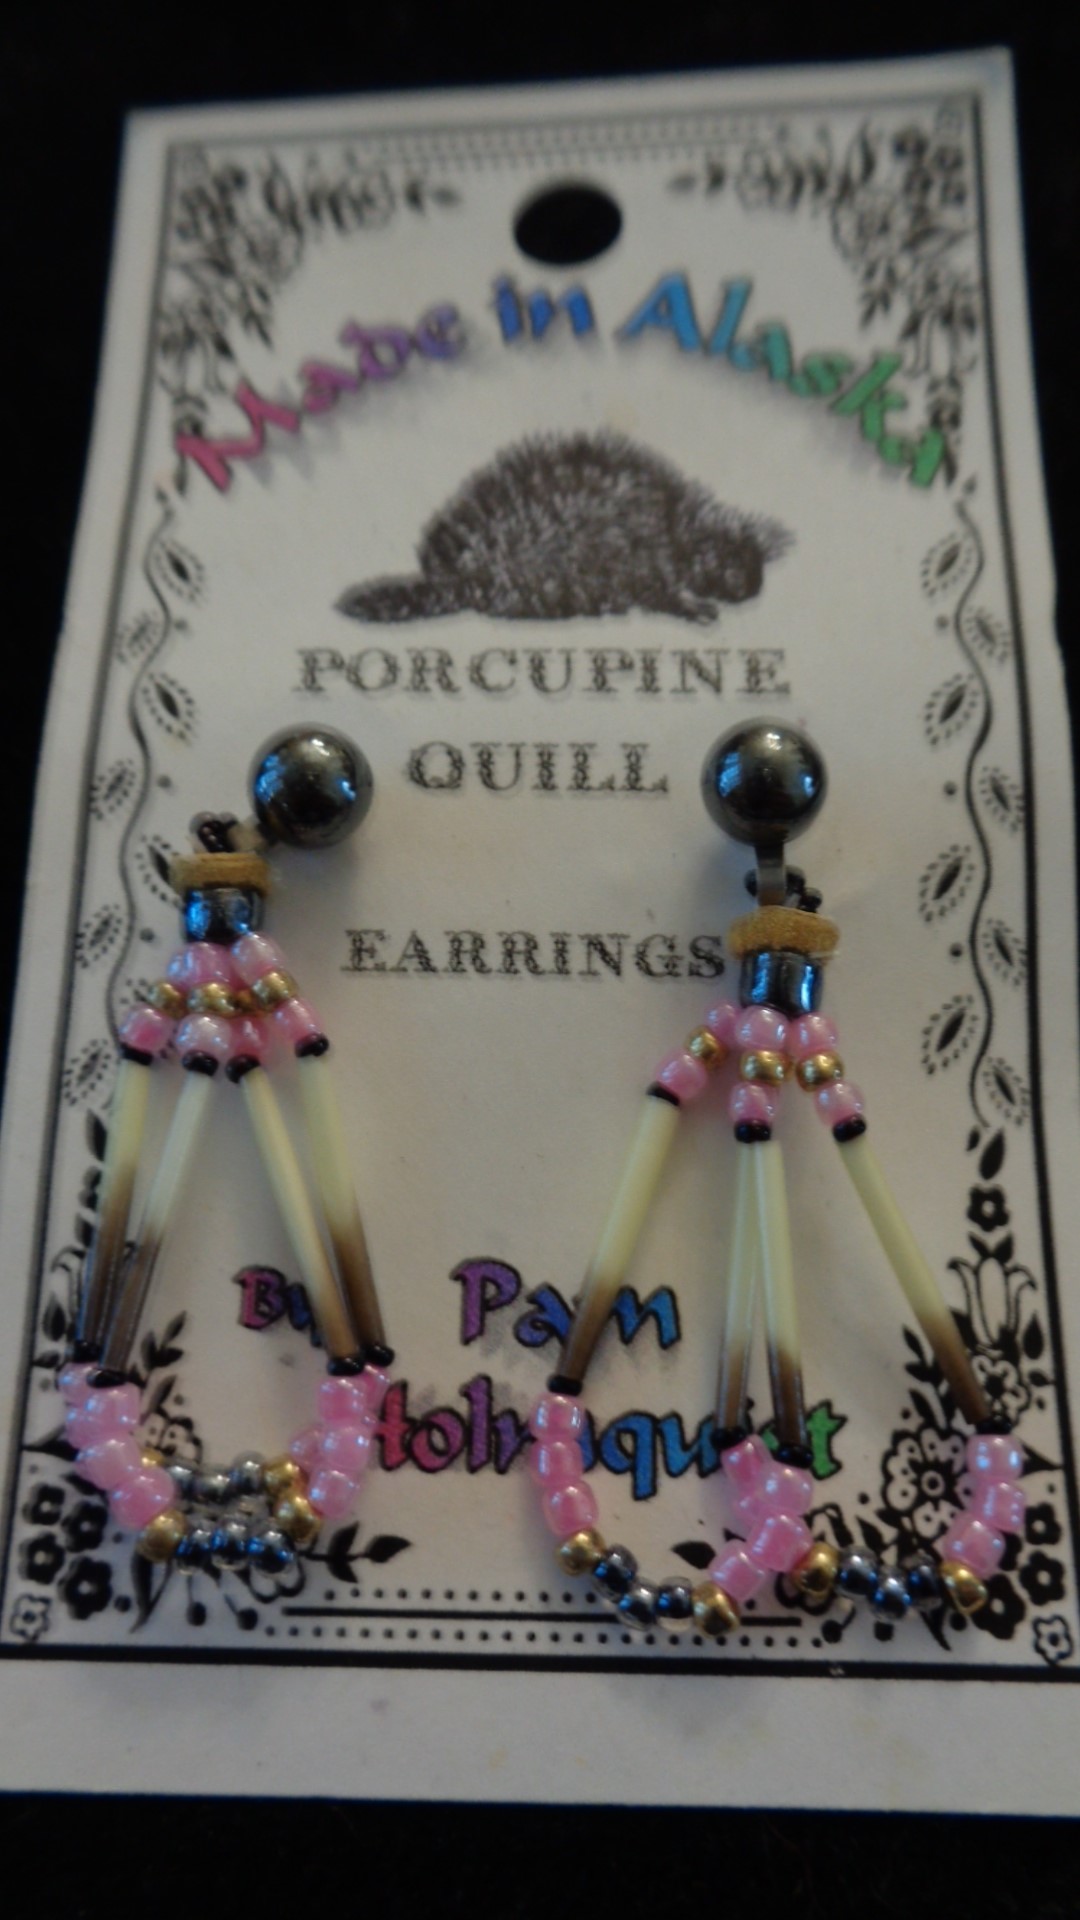 Earrings, porcupine quill & pink beads